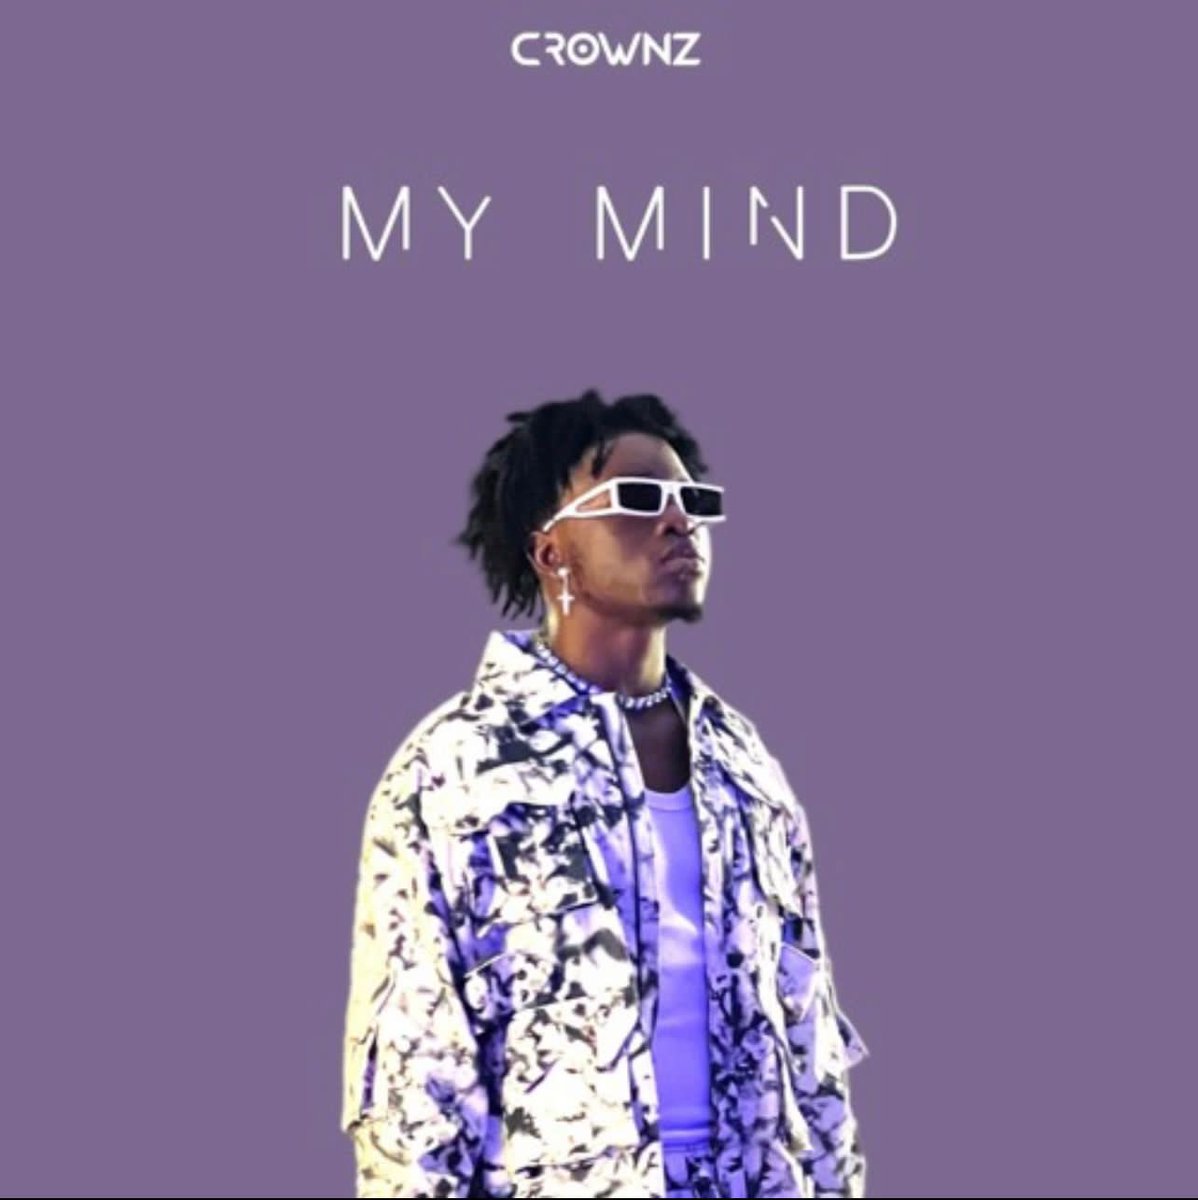 The mind is a powerful part of us, make it yours go stream MY MIND by @crownz_yl to get in your own mind groove. #CrownZMyMind